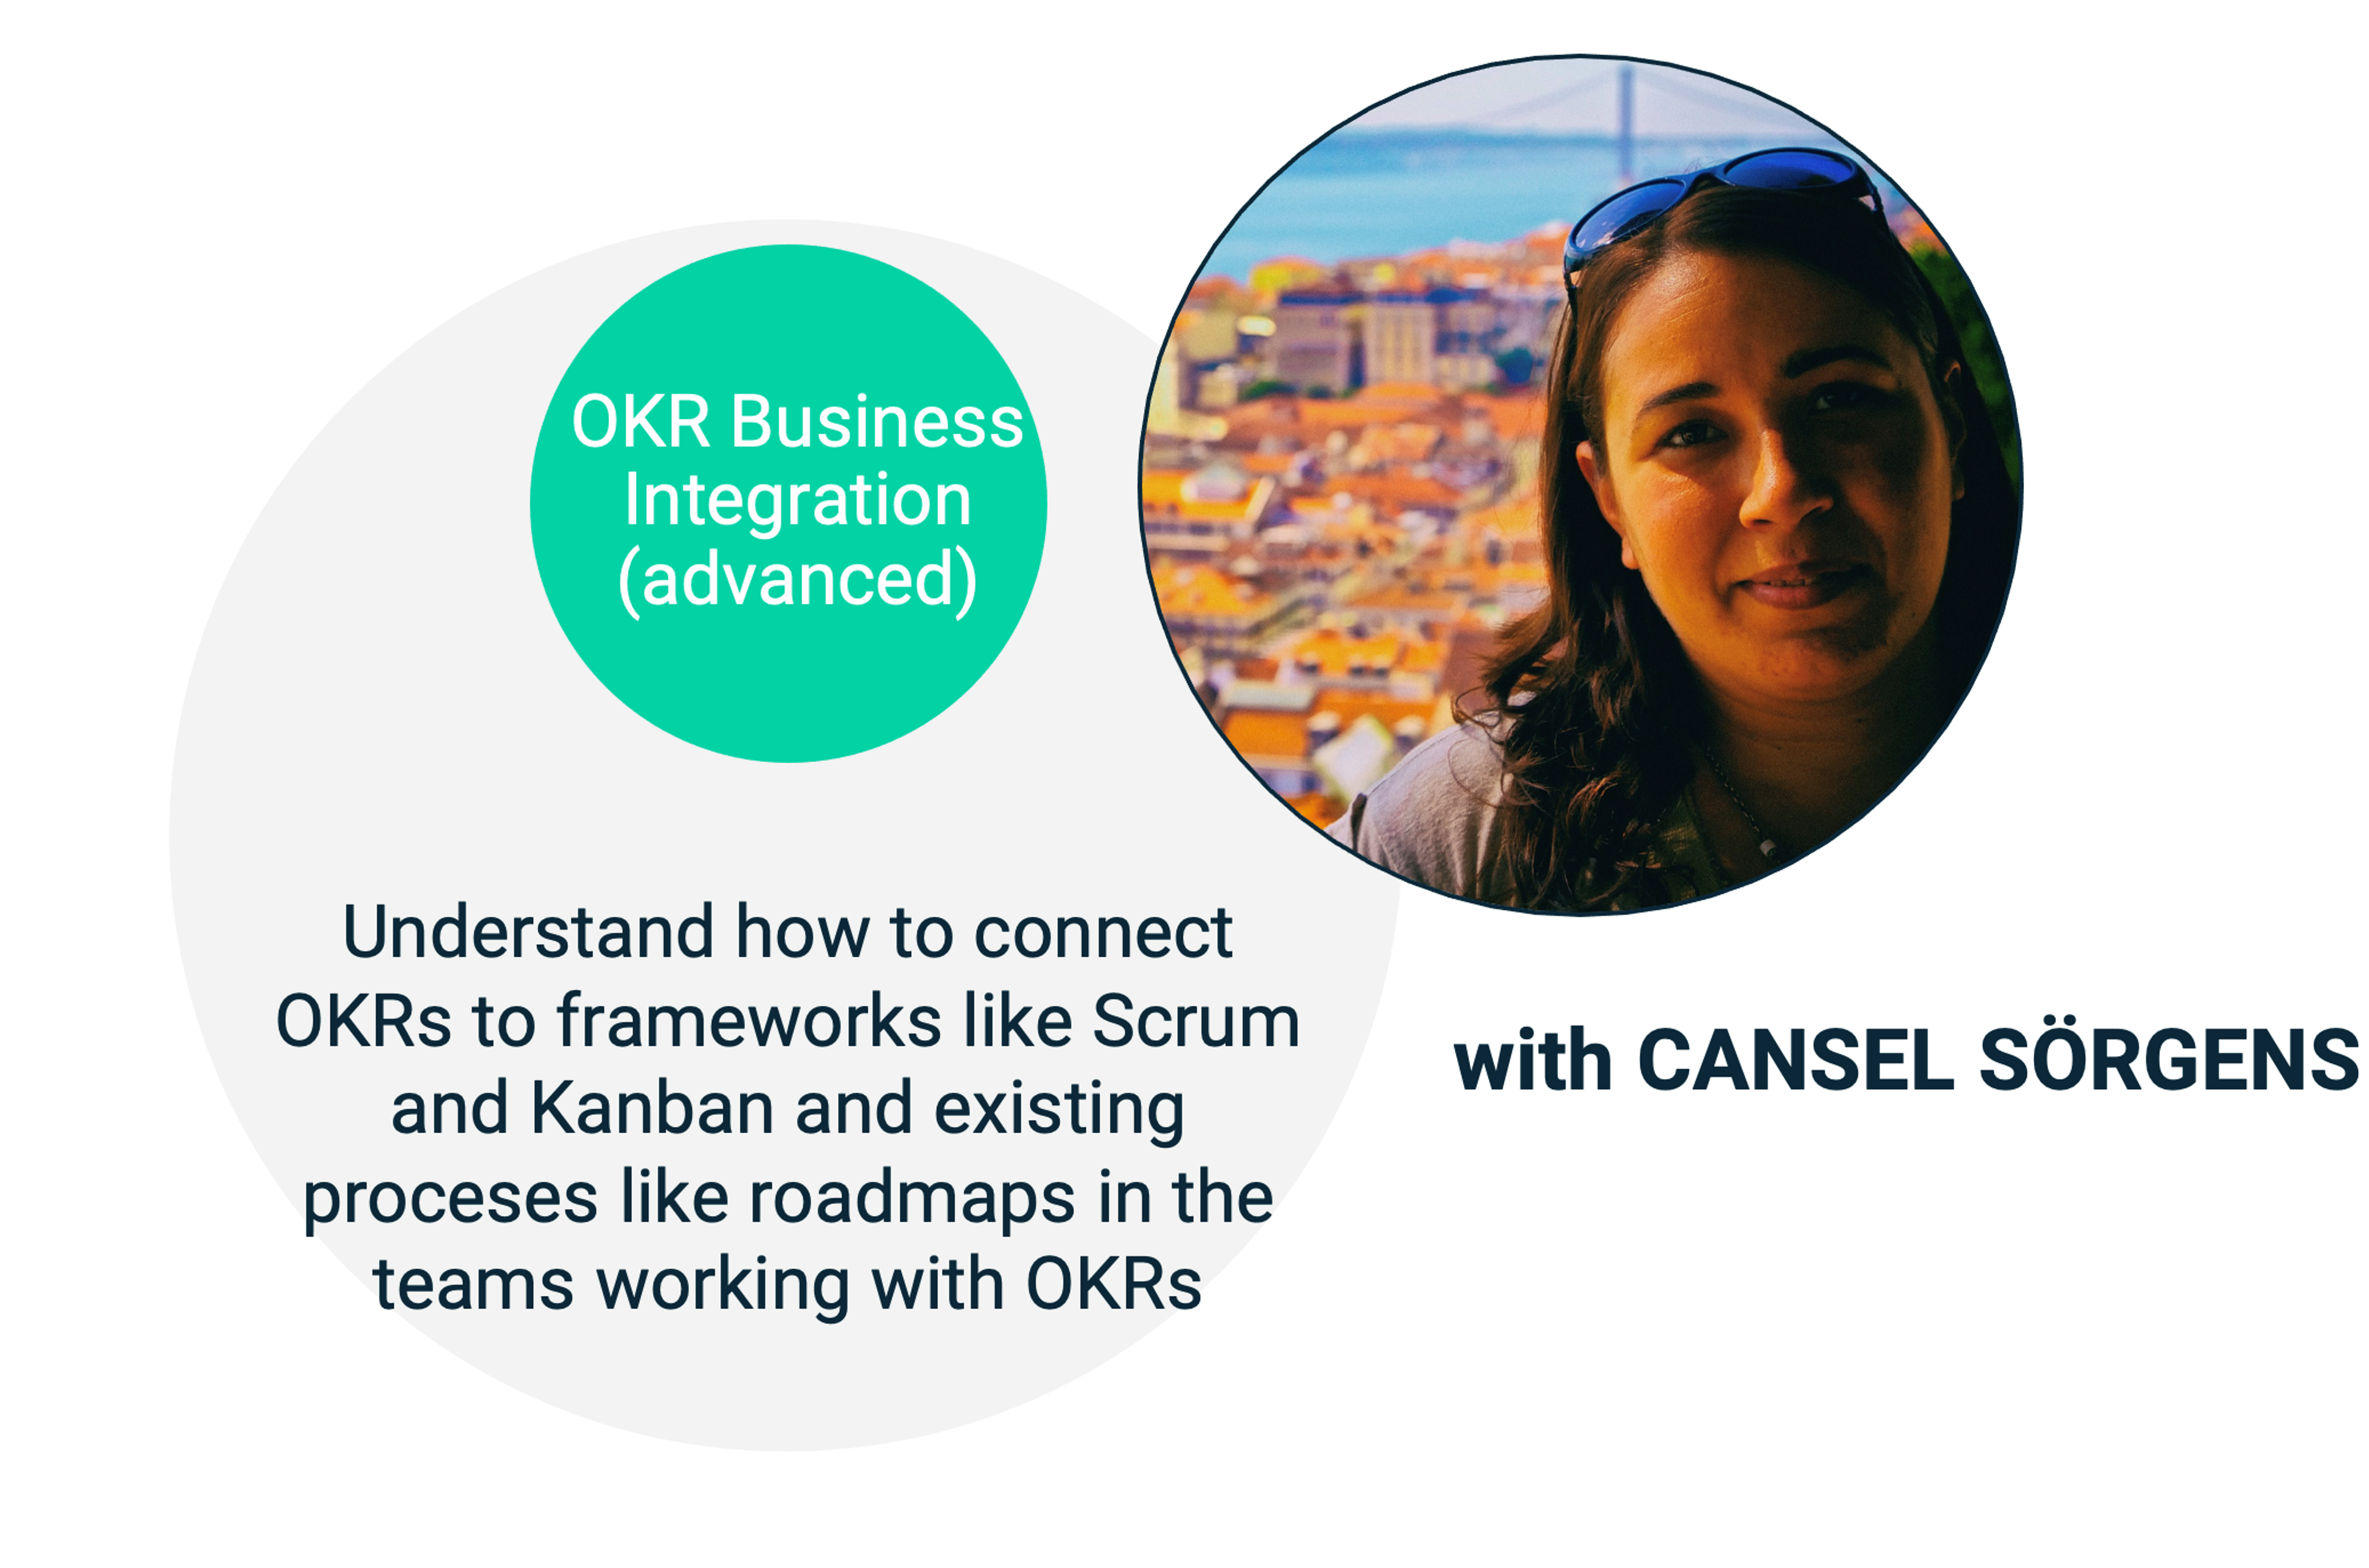 Cansel Sörges OKR Business Integration at OKR at the Center Coach Training